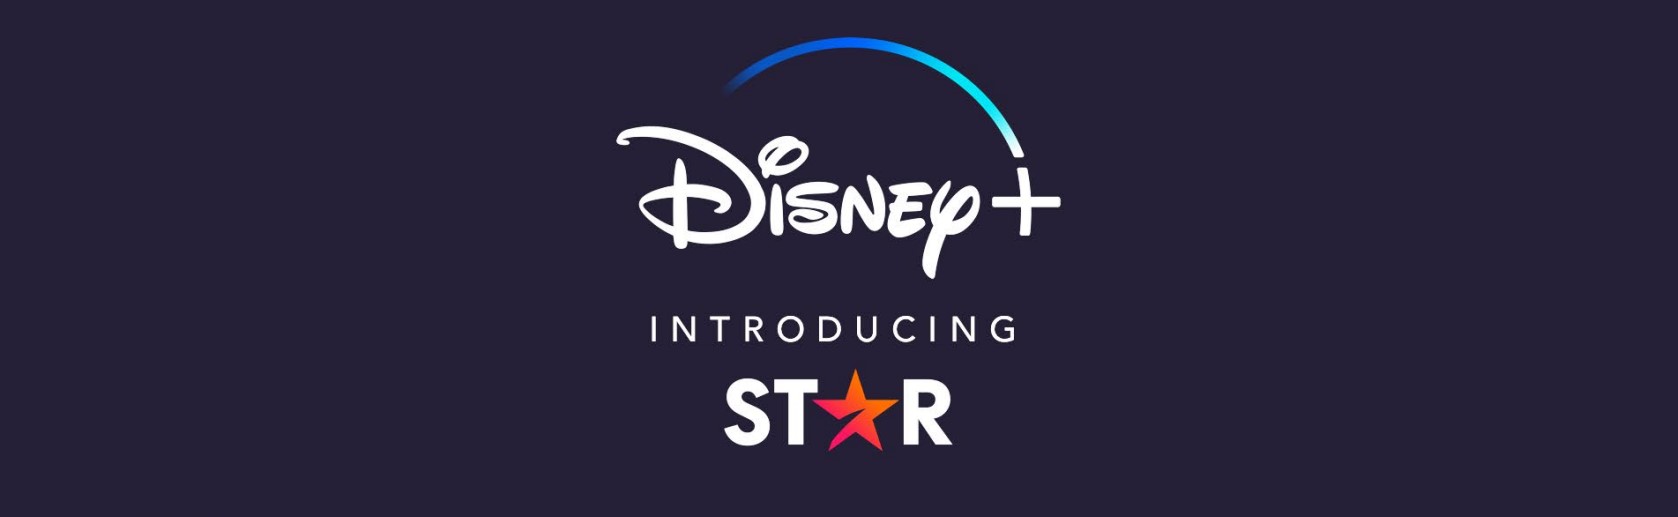 Star Brings Even More Award-Winning Tv Series, Blockbuster Movies, and Exclusive Originals to Disney+ in the UK & Ireland Beginning 23 February